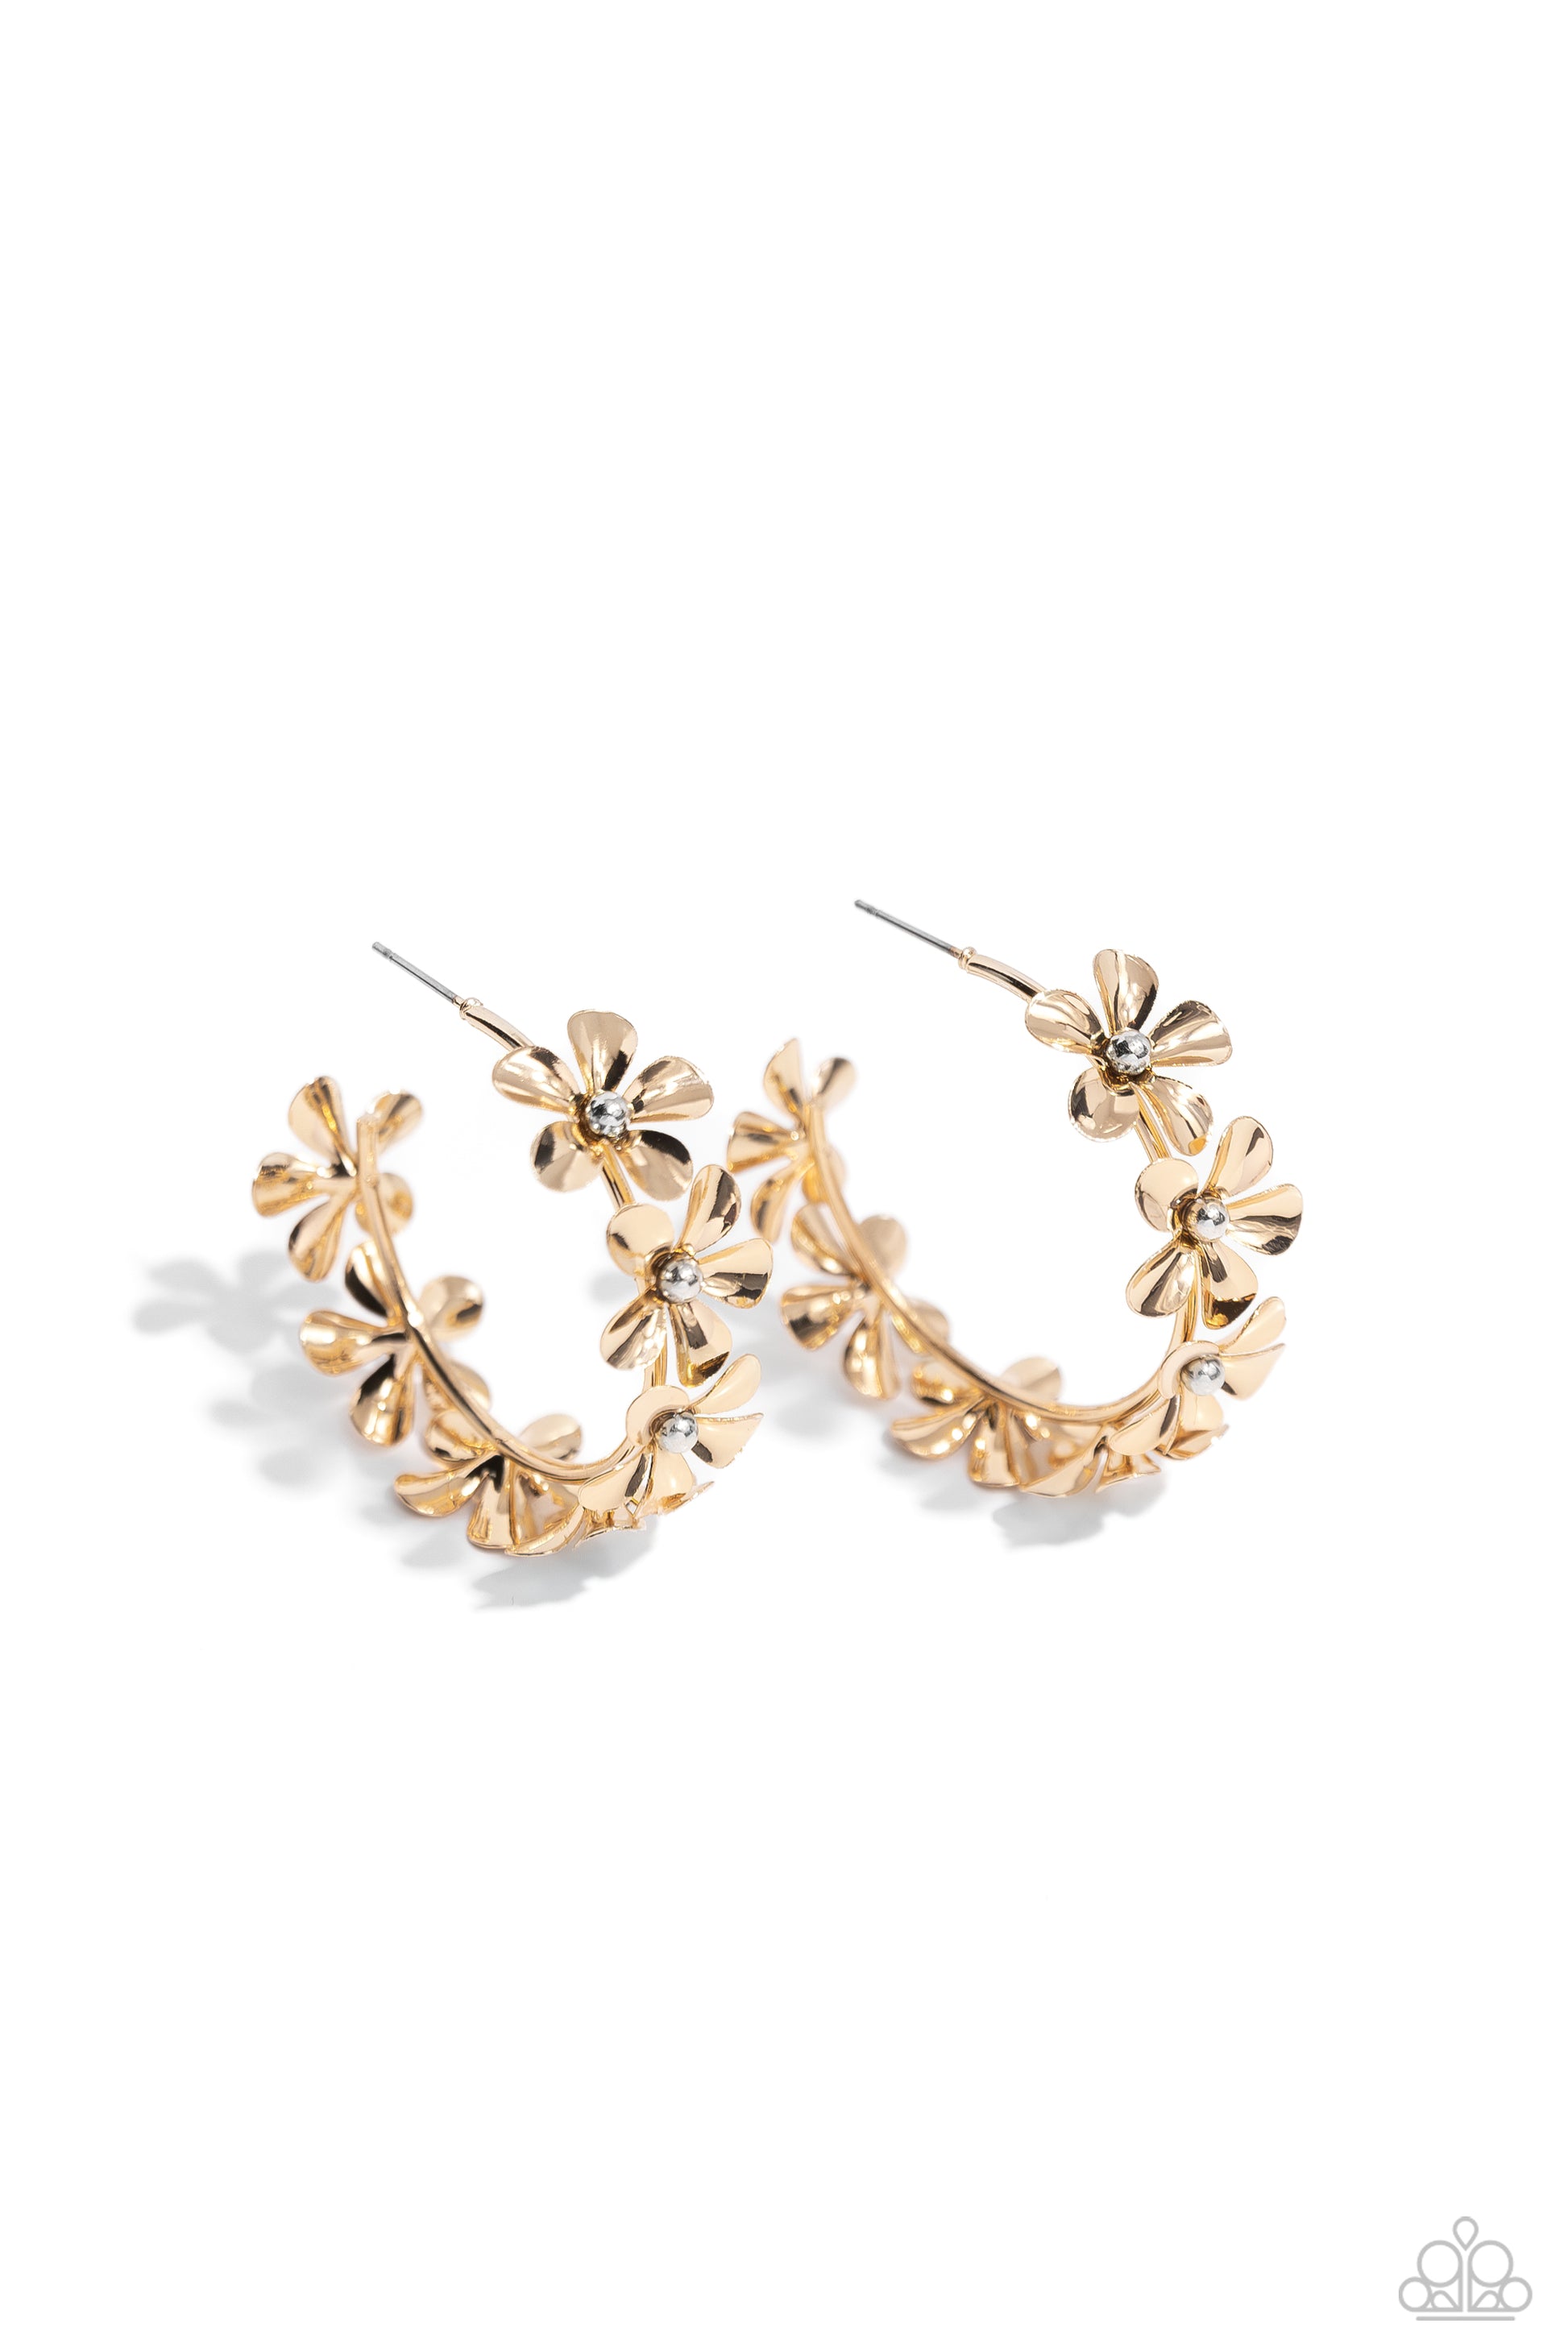 Floral Flamenco Gold Flower Hoop Earring - Paparazzi Accessories  Featuring silver bead centers, metallic gold flowers whimsically curl around the ear for a neutral floral display. Earring attaches to a standard post fitting. Hoop measures approximately 1 1/2" in diameter.  Sold as one pair of hoop earrings.  SKU: P5HO-GDXX-351XX